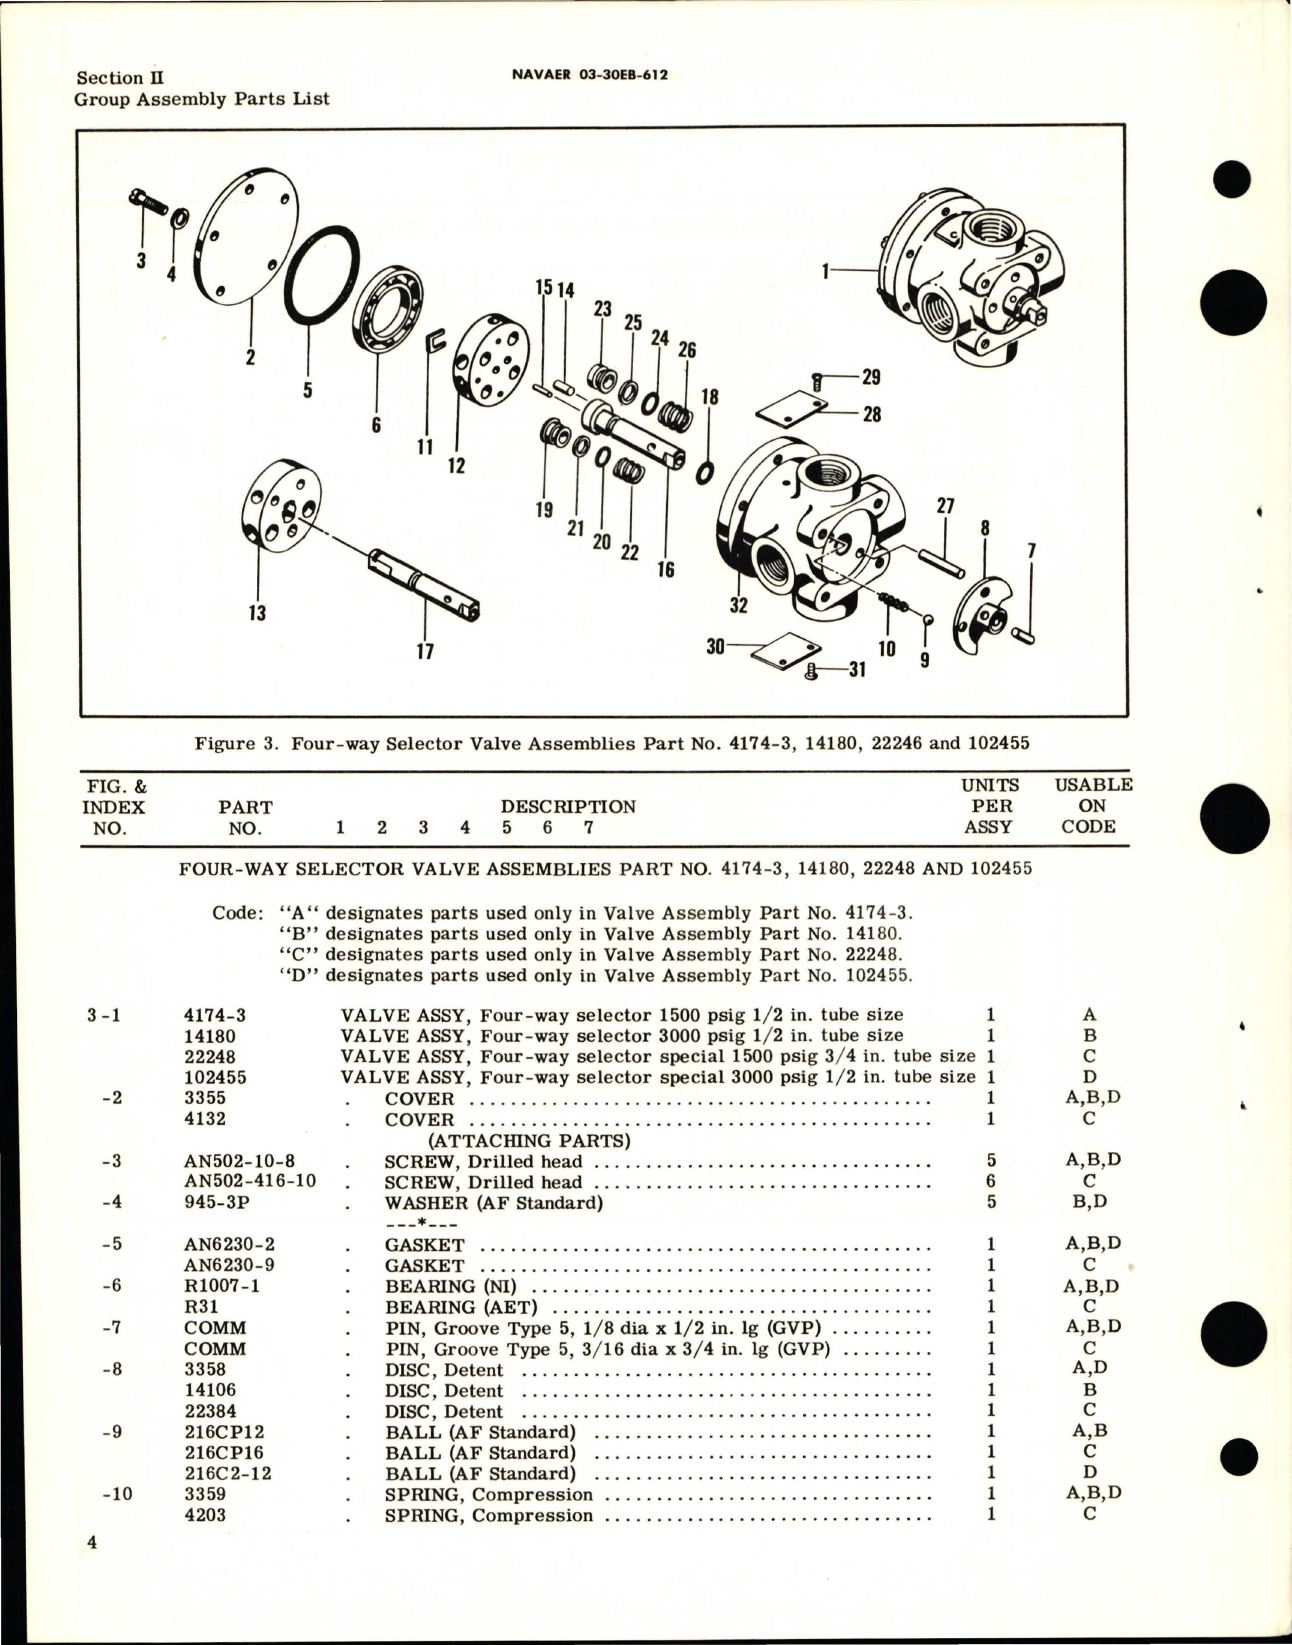 Sample page 6 from AirCorps Library document: Illustrated Parts Breakdown for Rotary Selector Valves